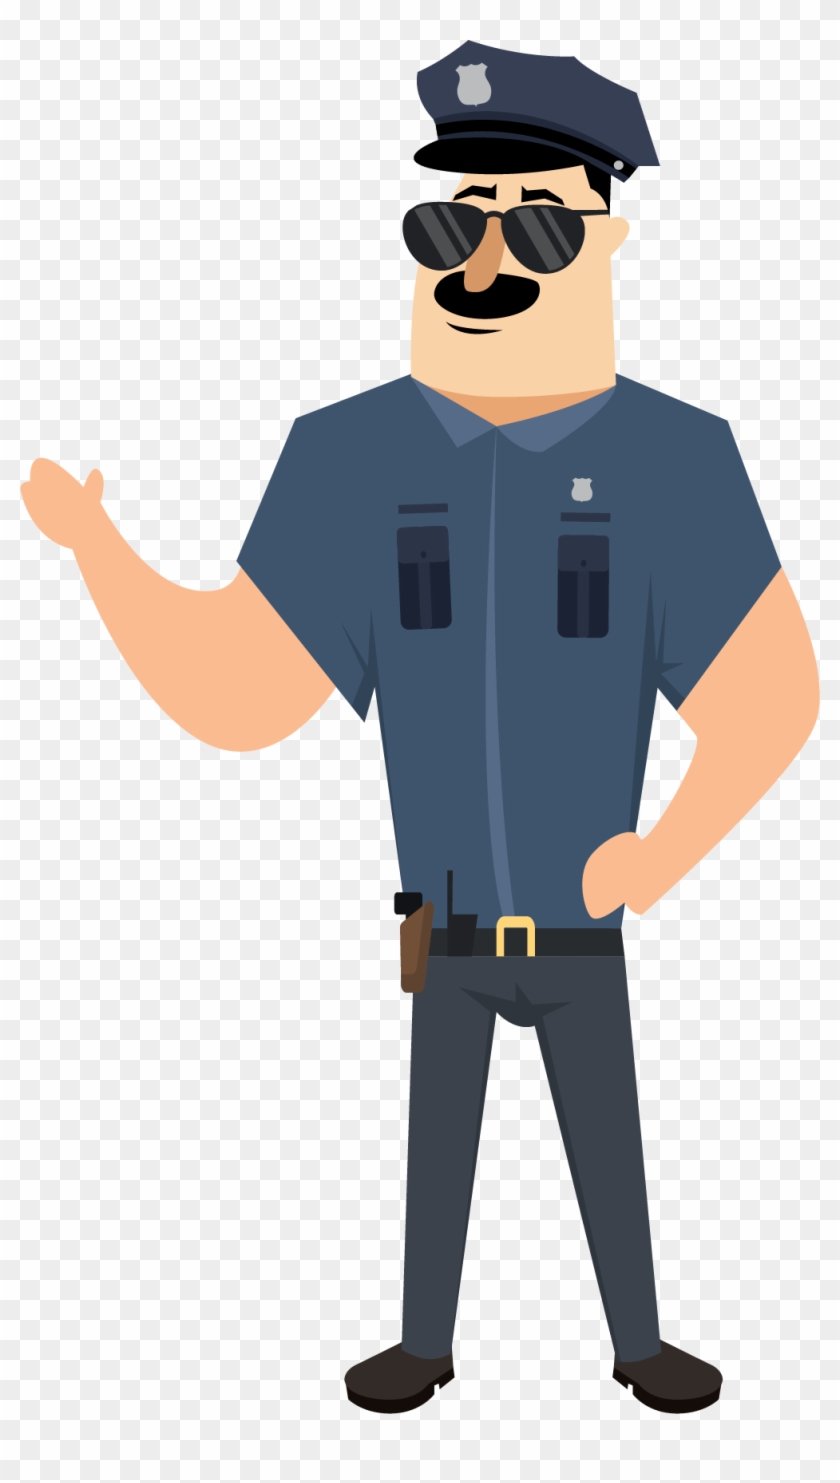 Cartoon Police Illustration - Police Officer Cartoon Cop - Free Transparent  PNG Clipart Images Download